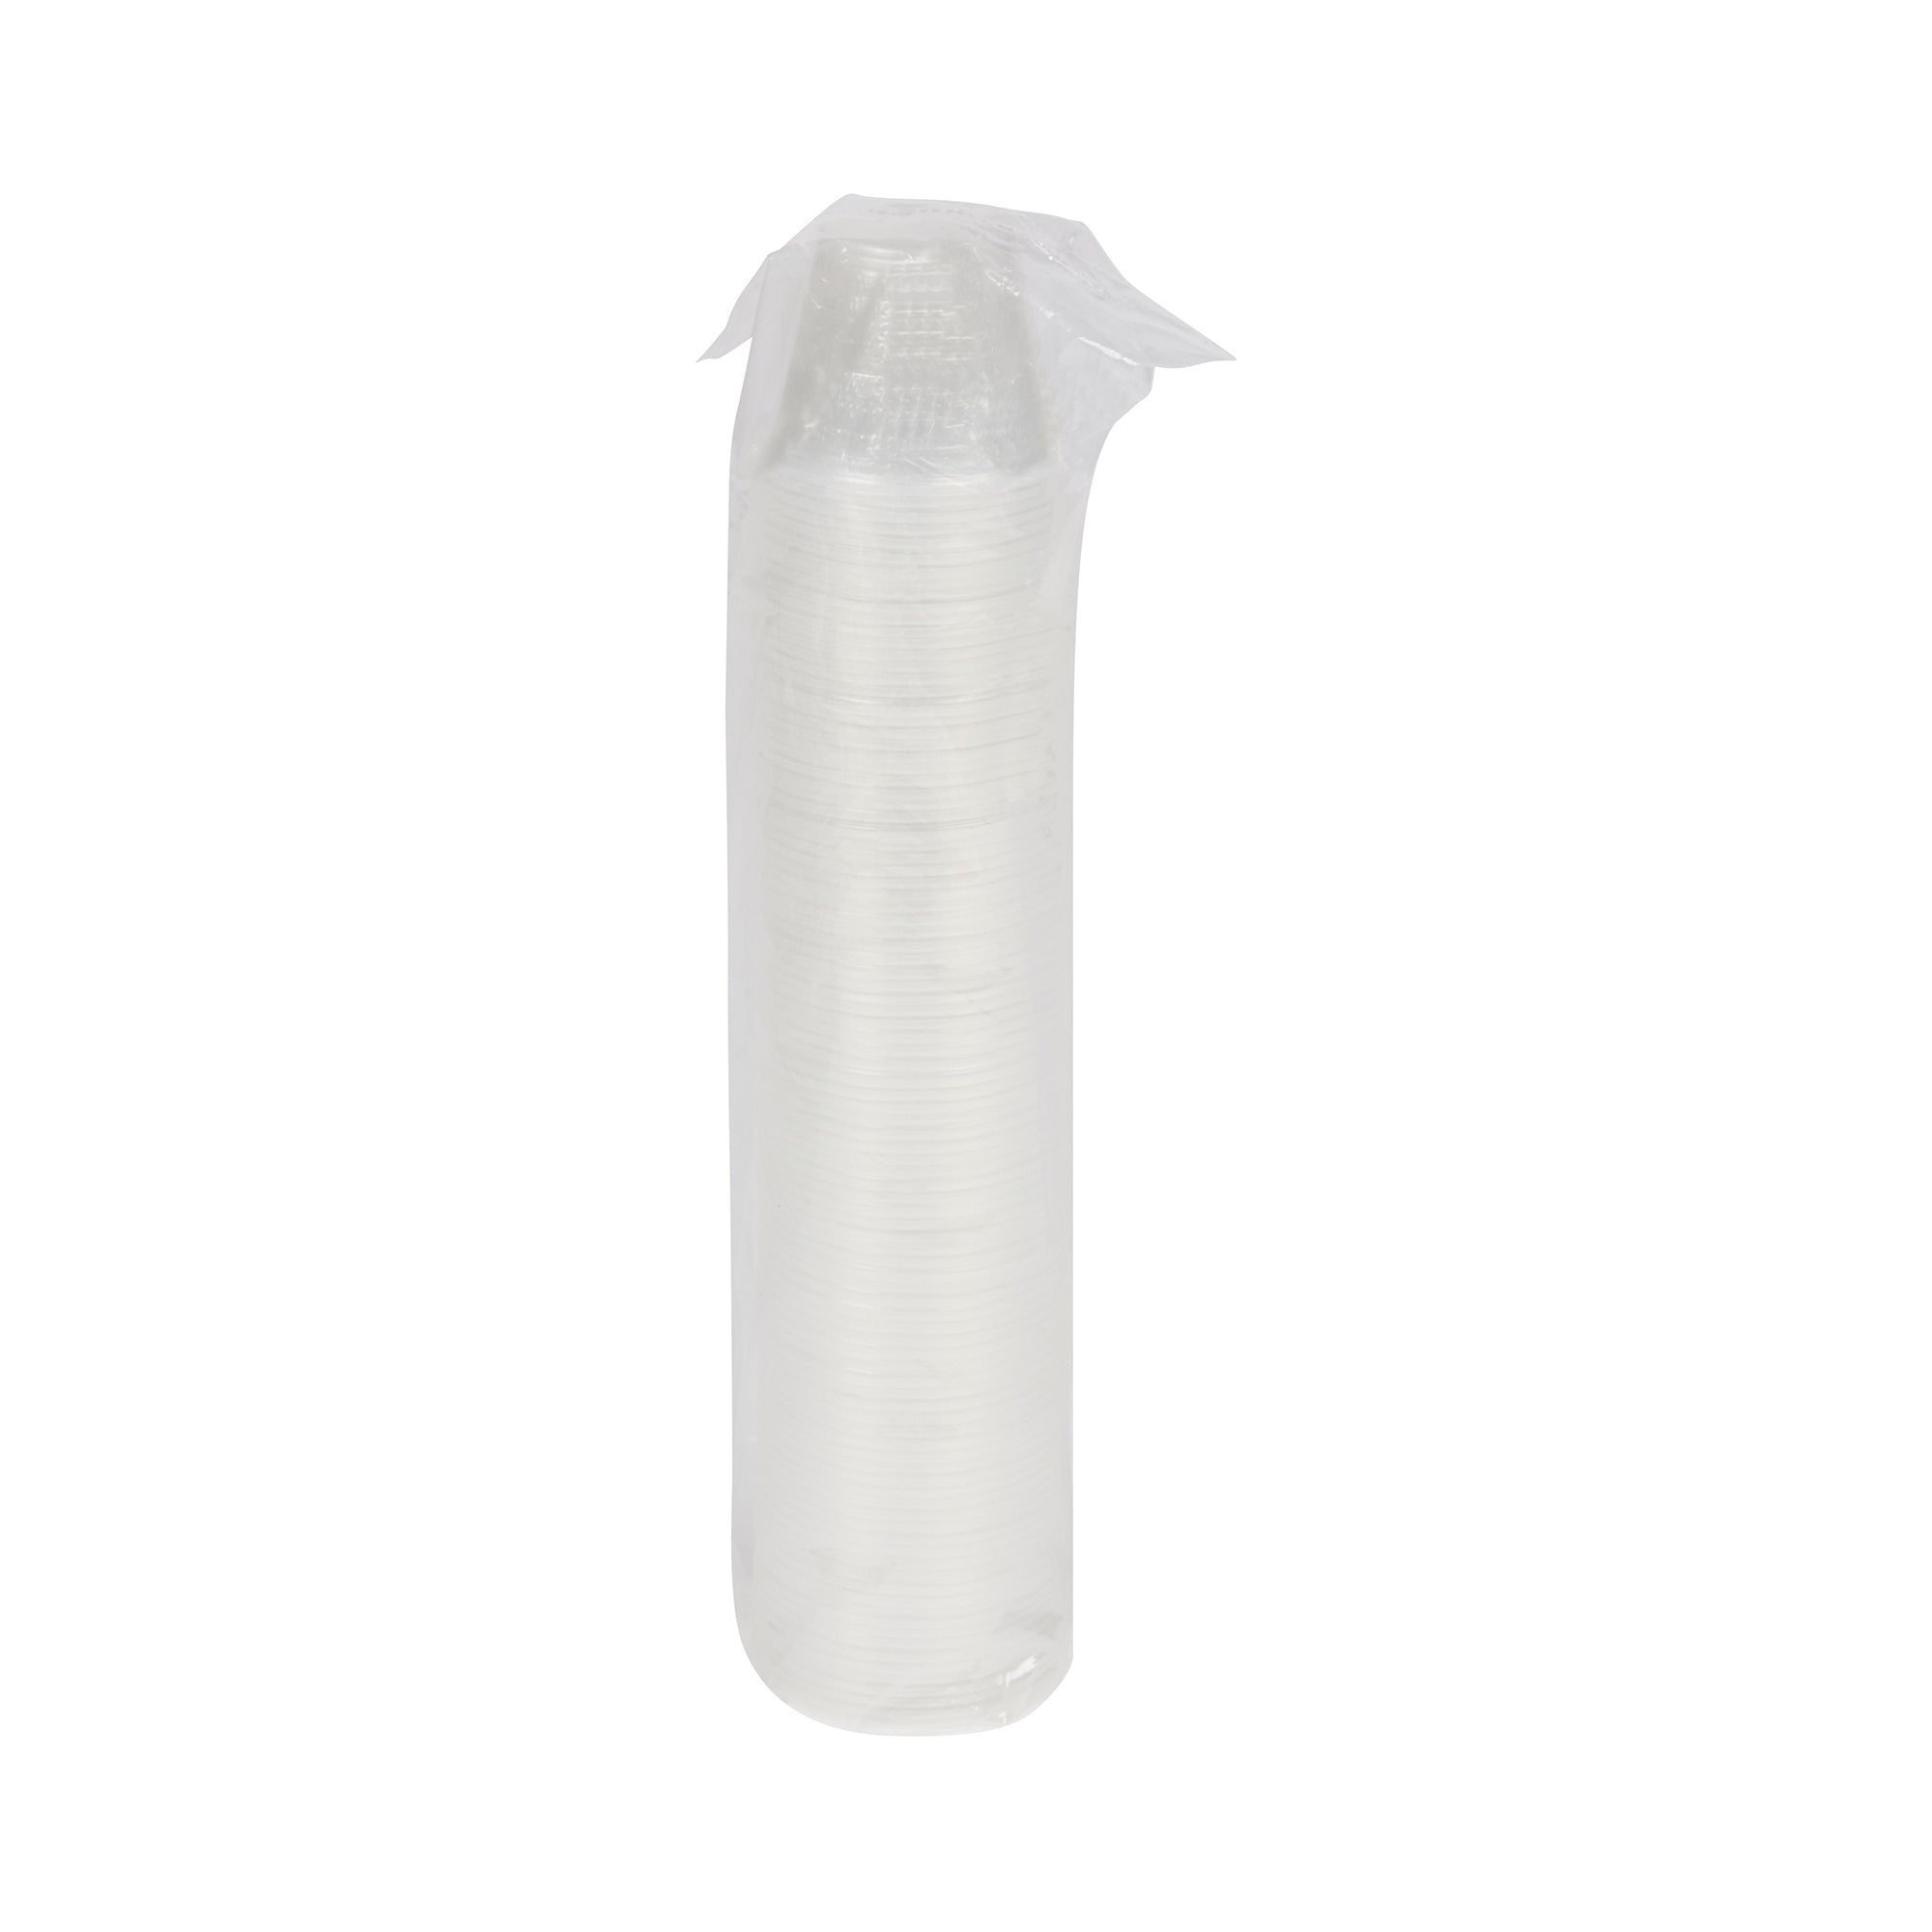 McKesson 1 oz Clear Graduated Medicine Cups - Disposable, 100 Pack